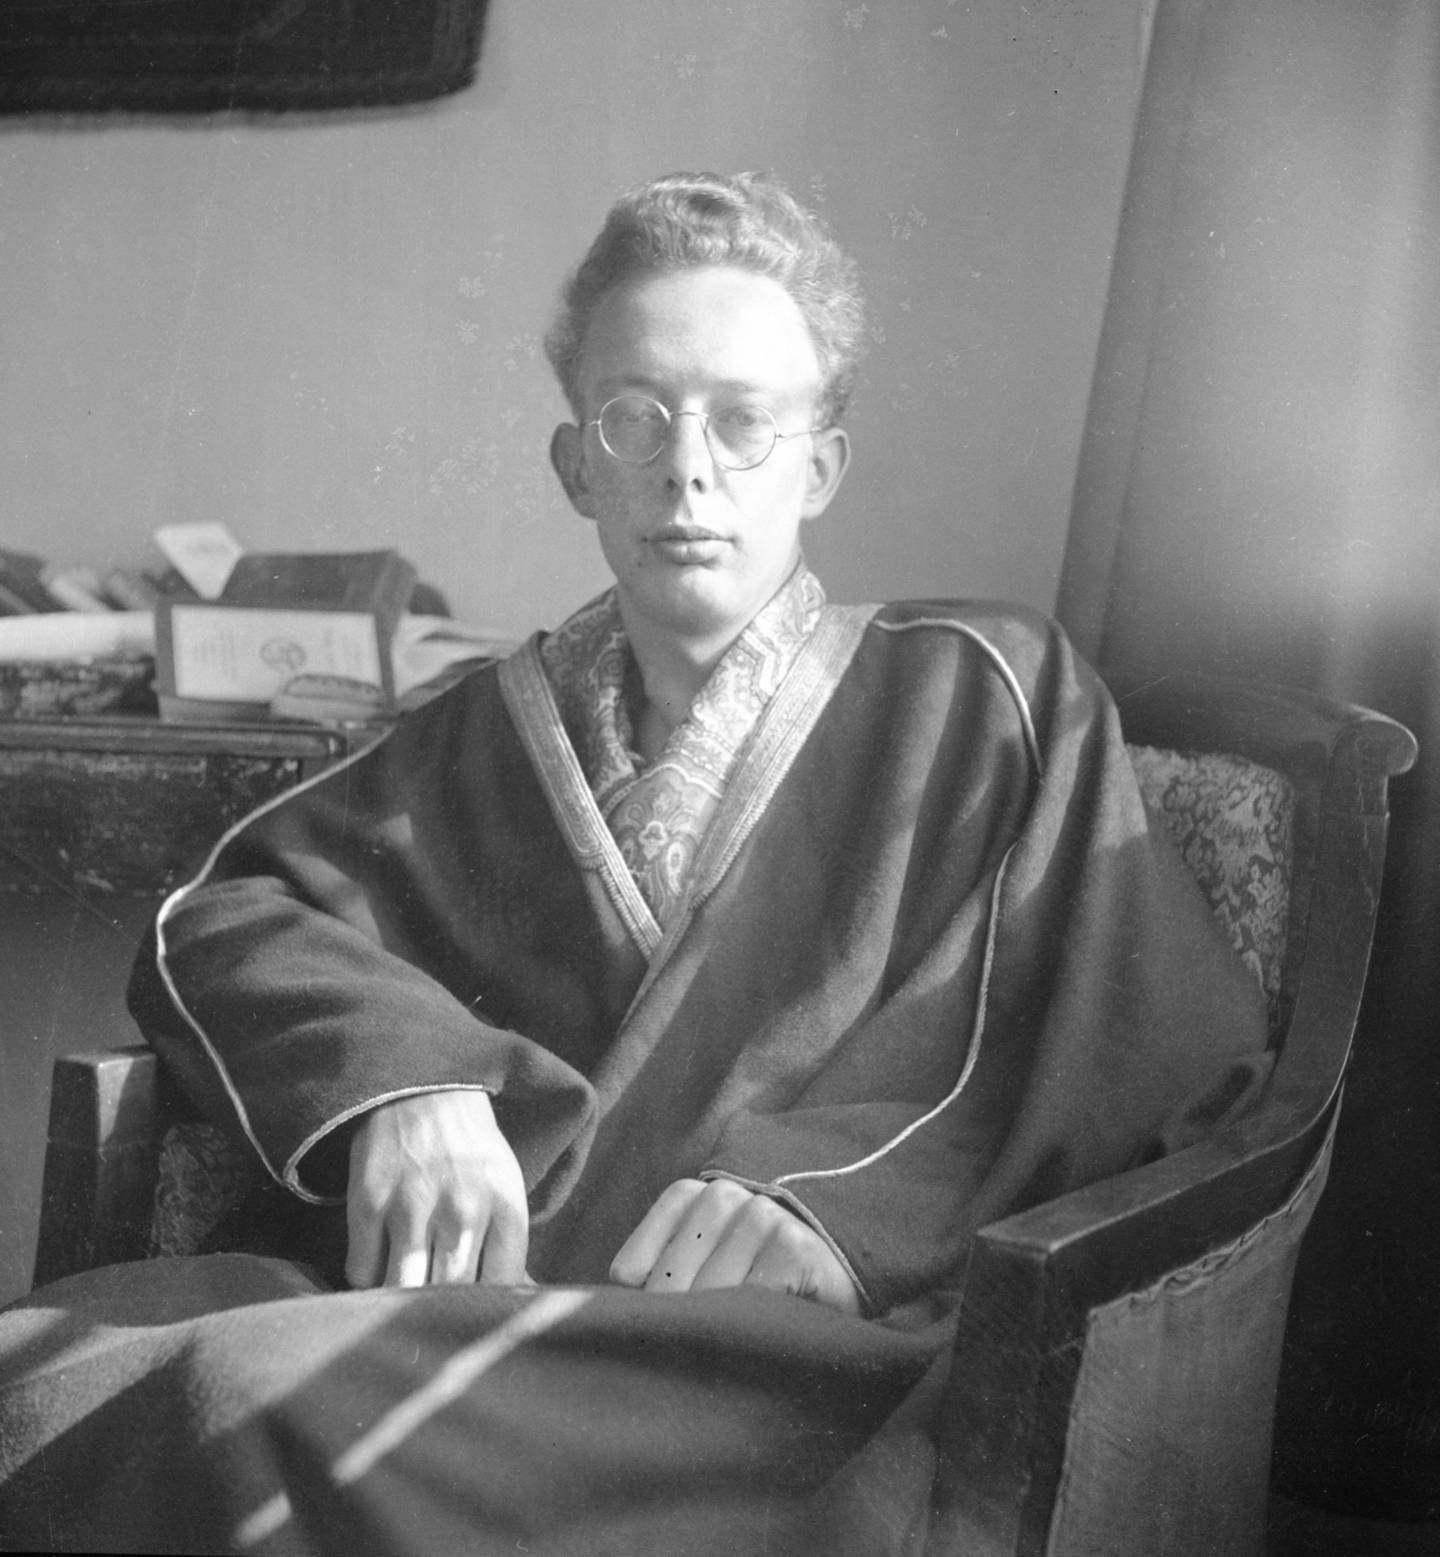 Peter Lienhardt wearing a bisht or Arab cloak in his study at Oxford University in the late 1950s or early 1960s. Photo: Estate of Peter Lienhardt 